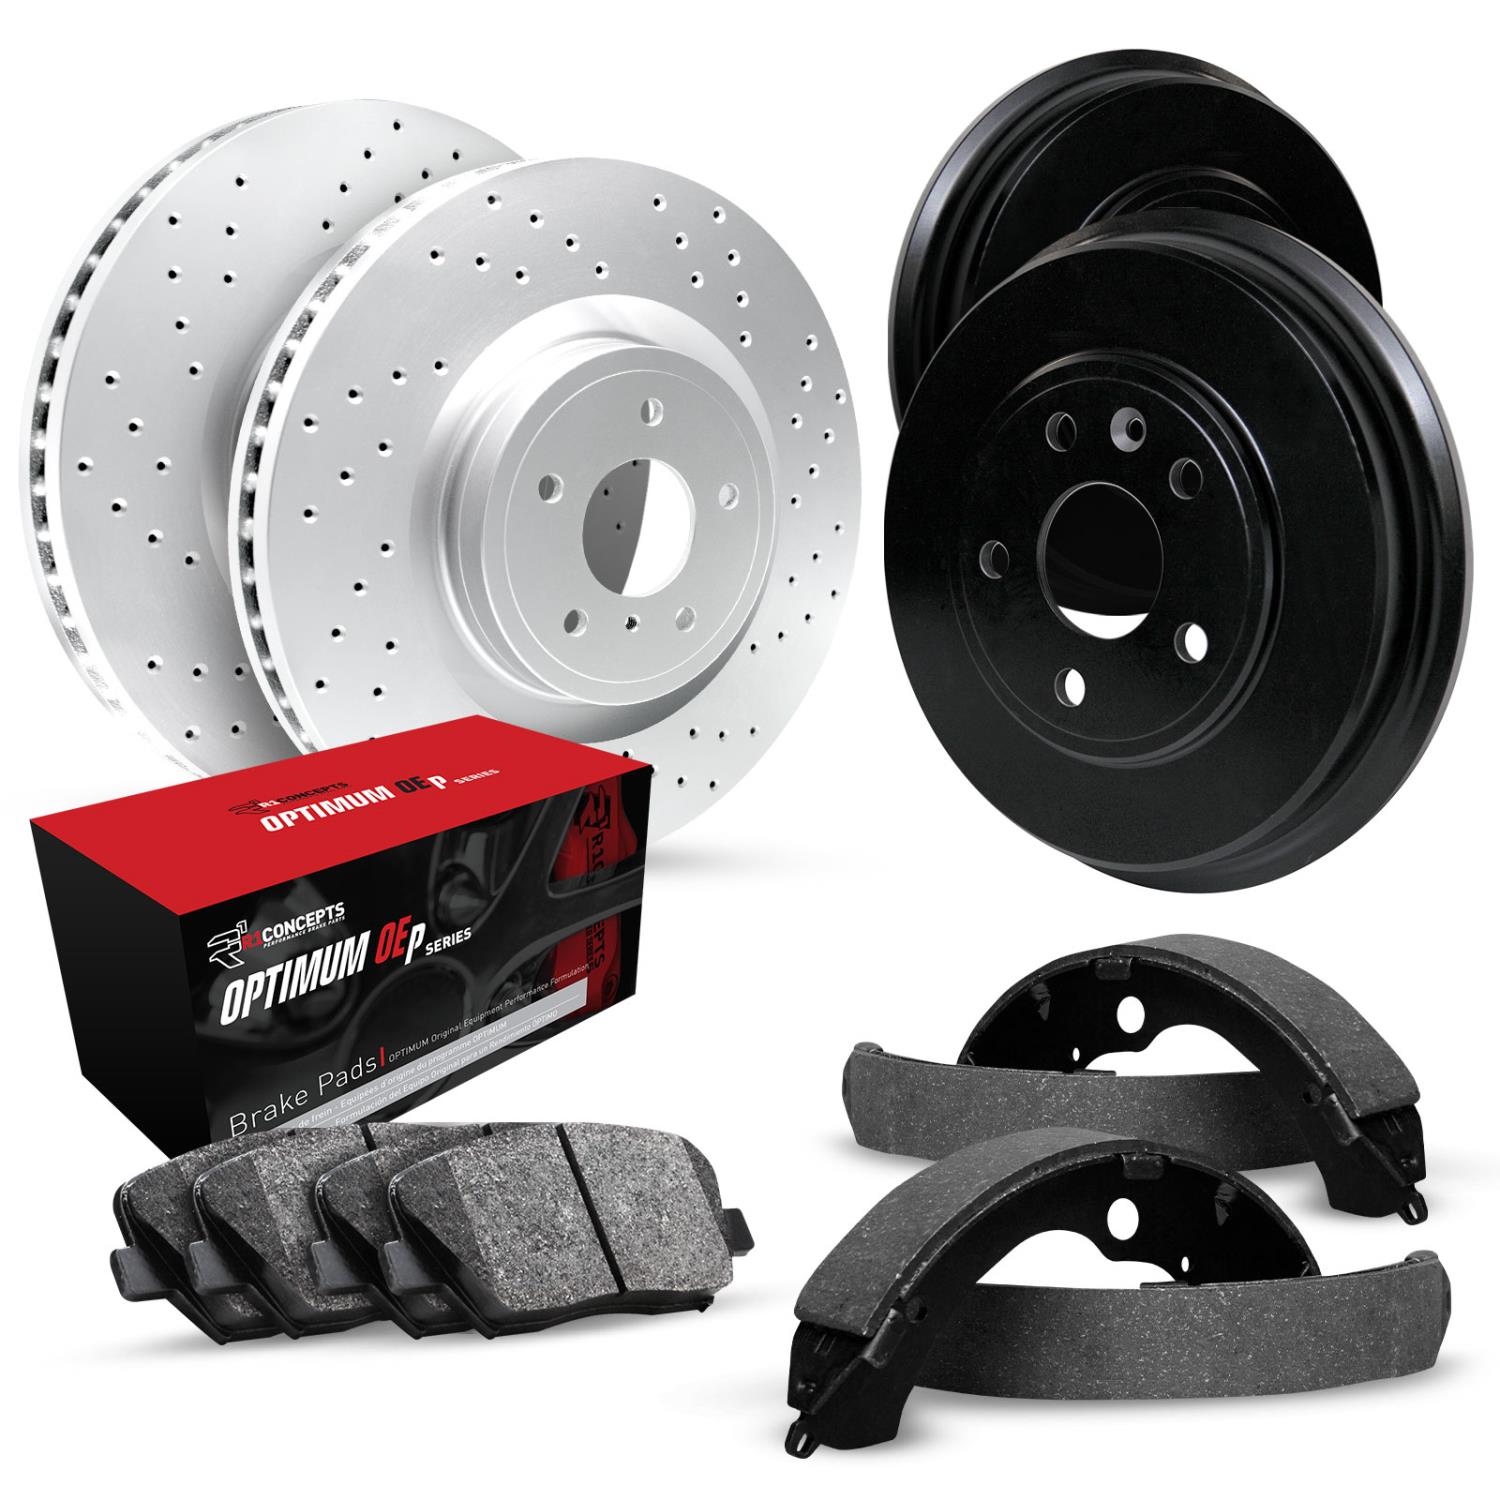 GEO-Carbon Drilled Brake Rotor & Drum Set w/Optimum OE Pads & Shoes, 1990-1992 Infiniti/Nissan, Position: Front & Rear